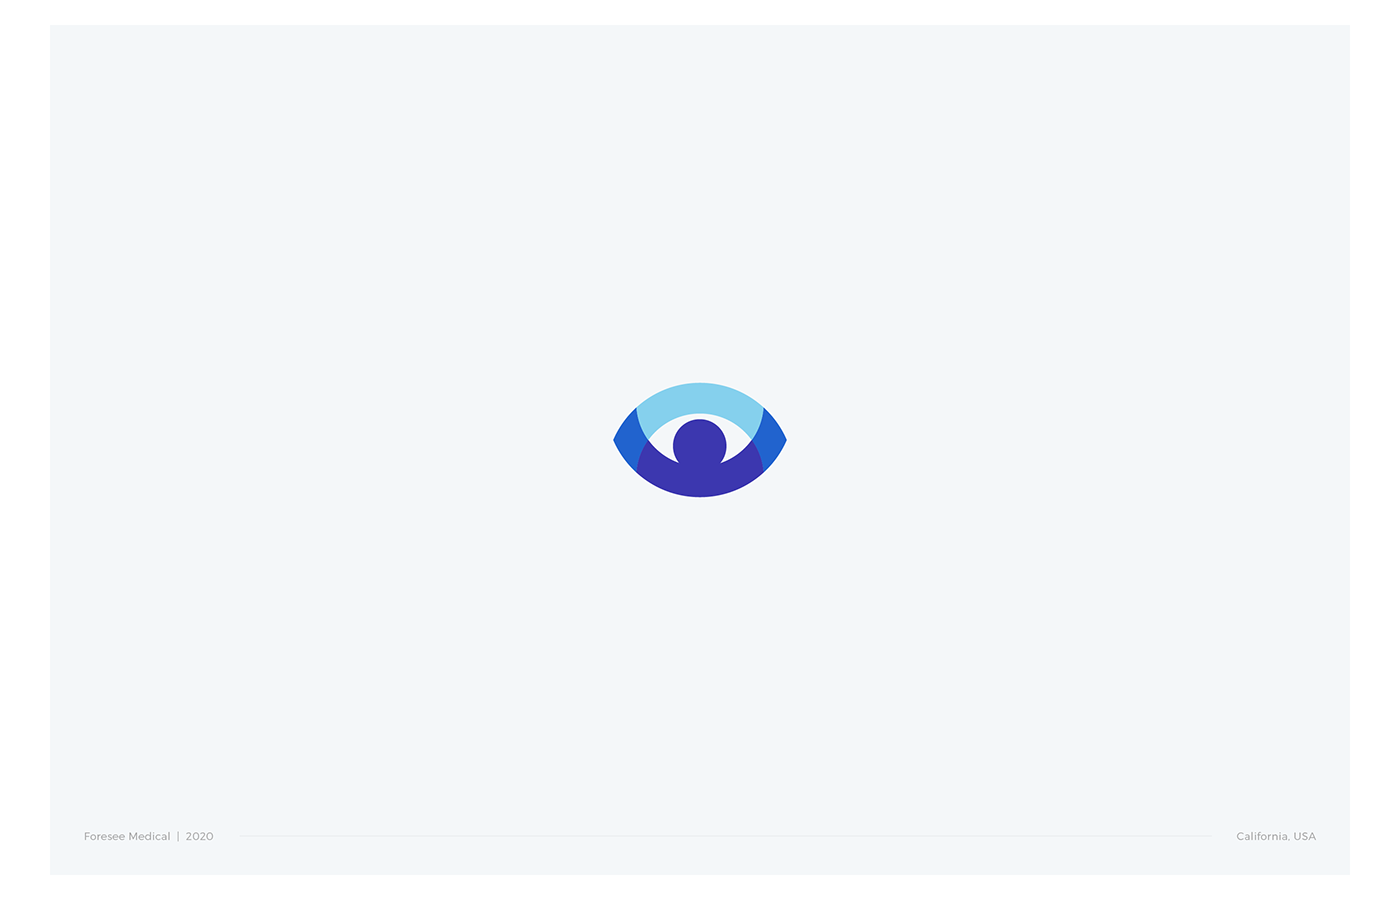 Bold eye icon with a combination of 3 blue colors.